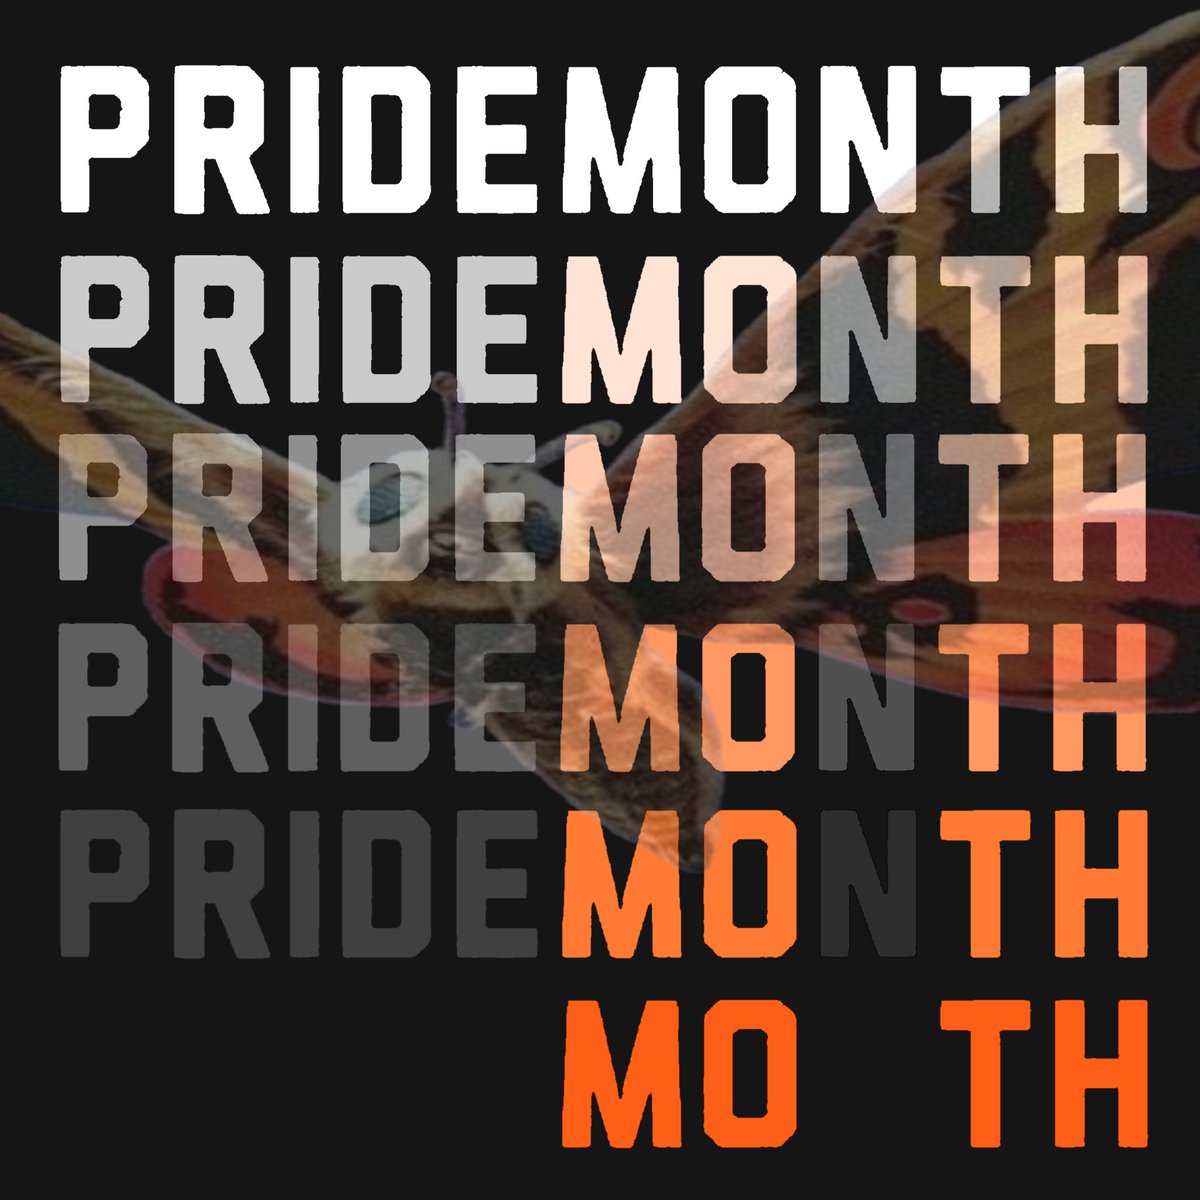 I am proud to be a moff! Happy Pride Moff everyone. :3 💪💜